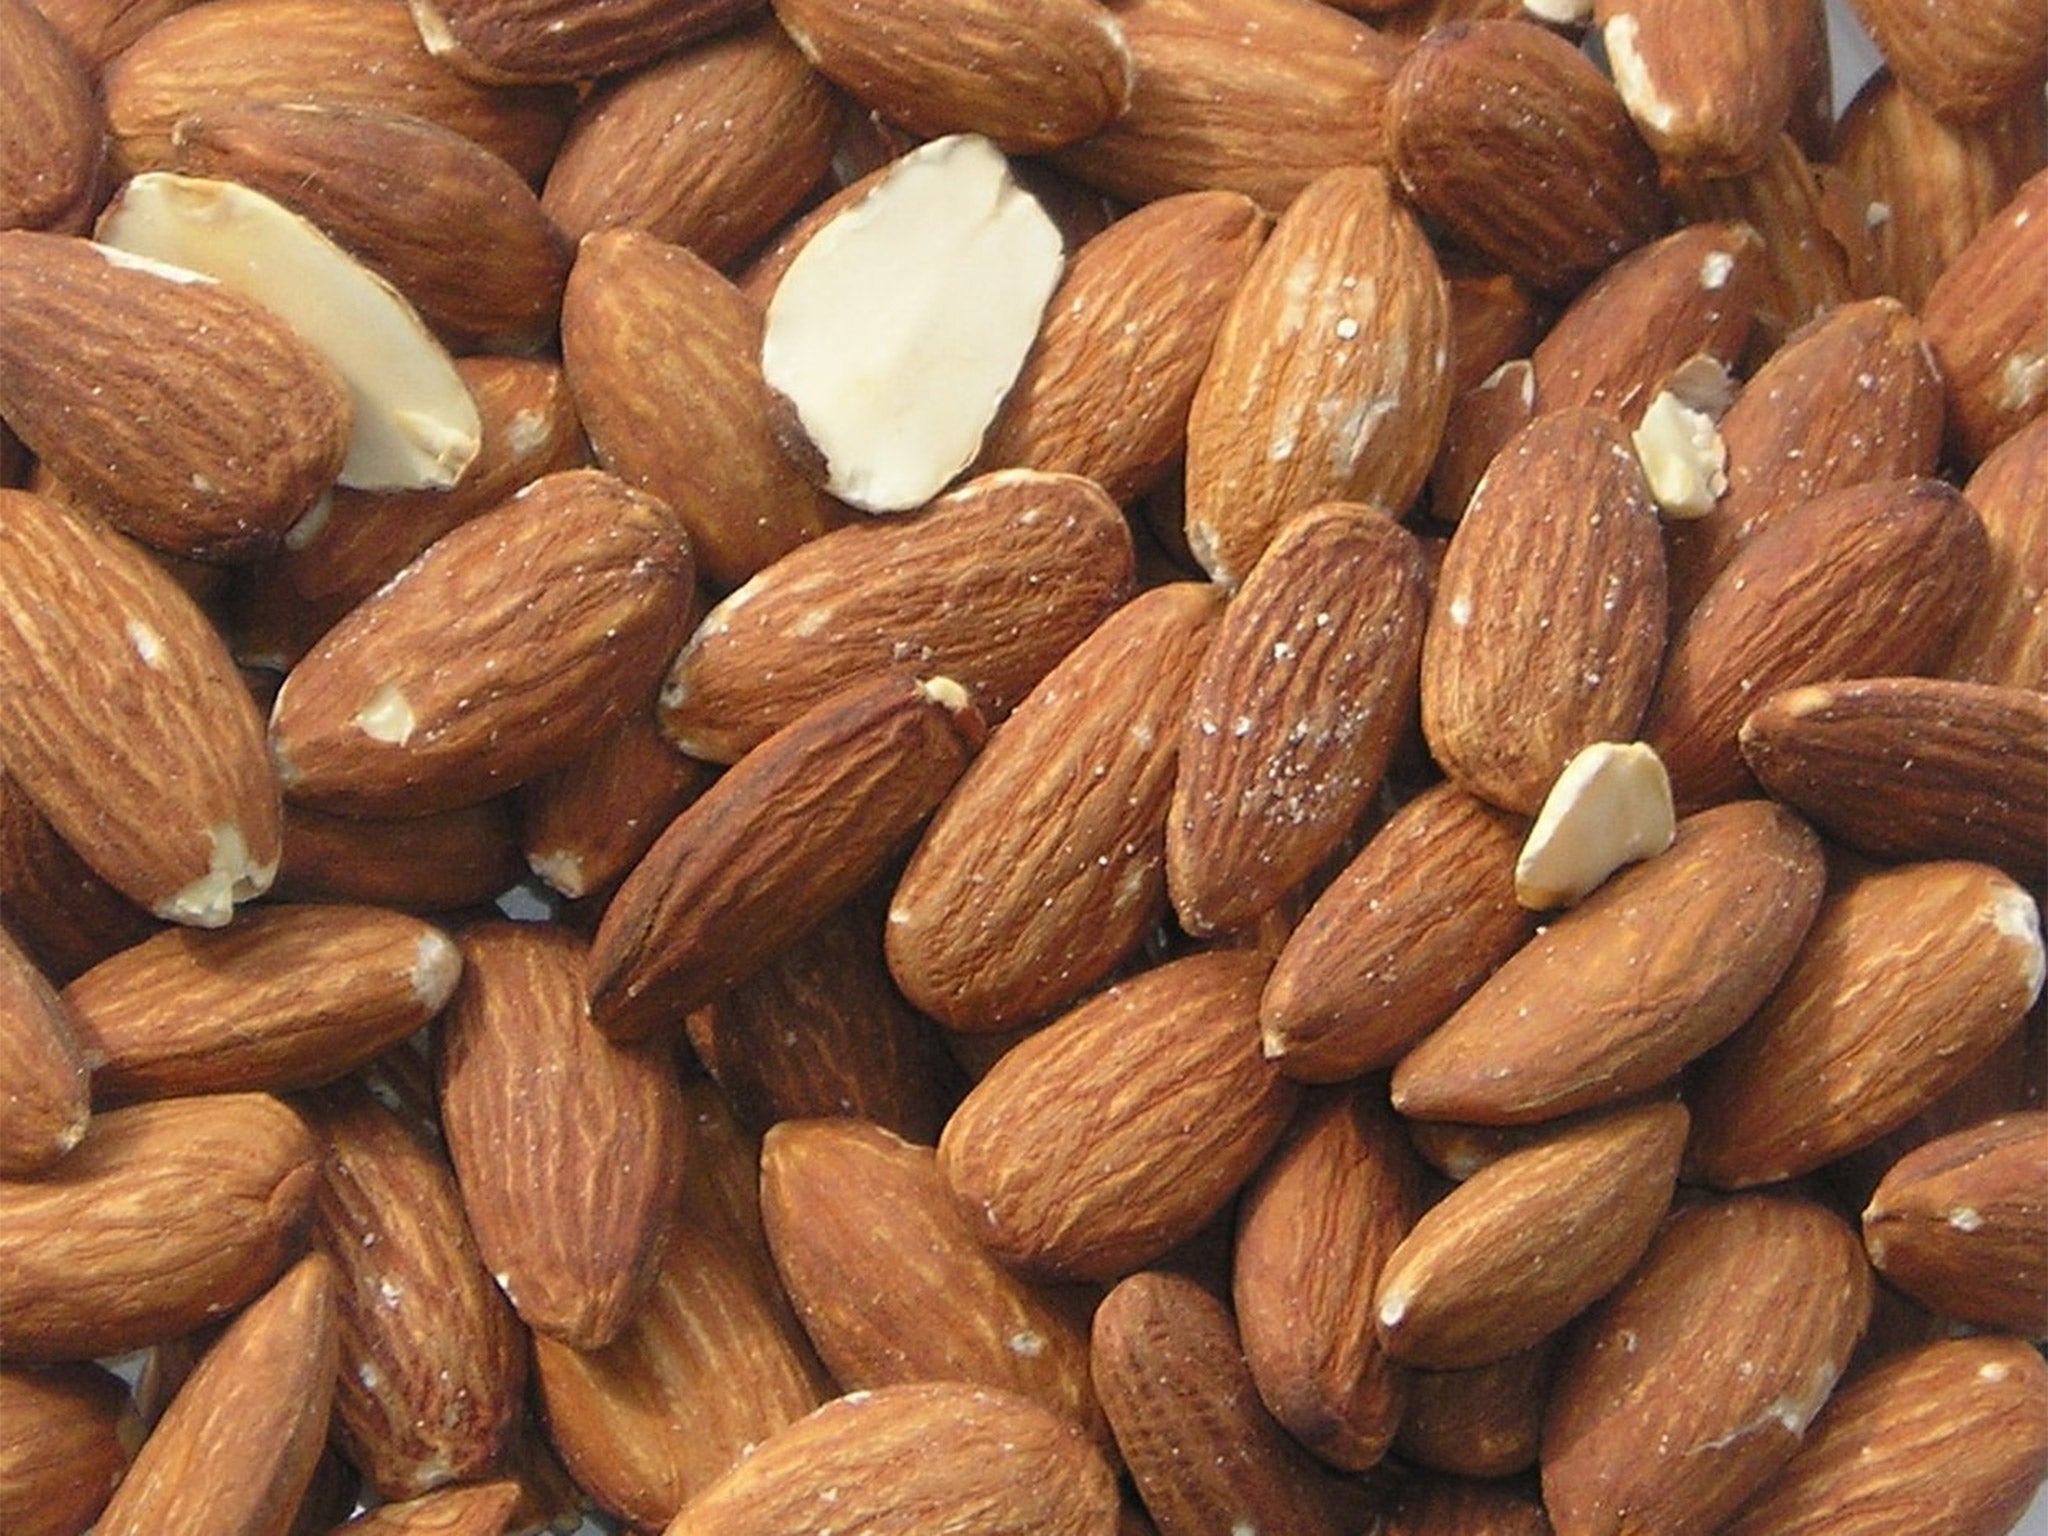 The Food Standards Agency is investigating a series of nut-contamination cases